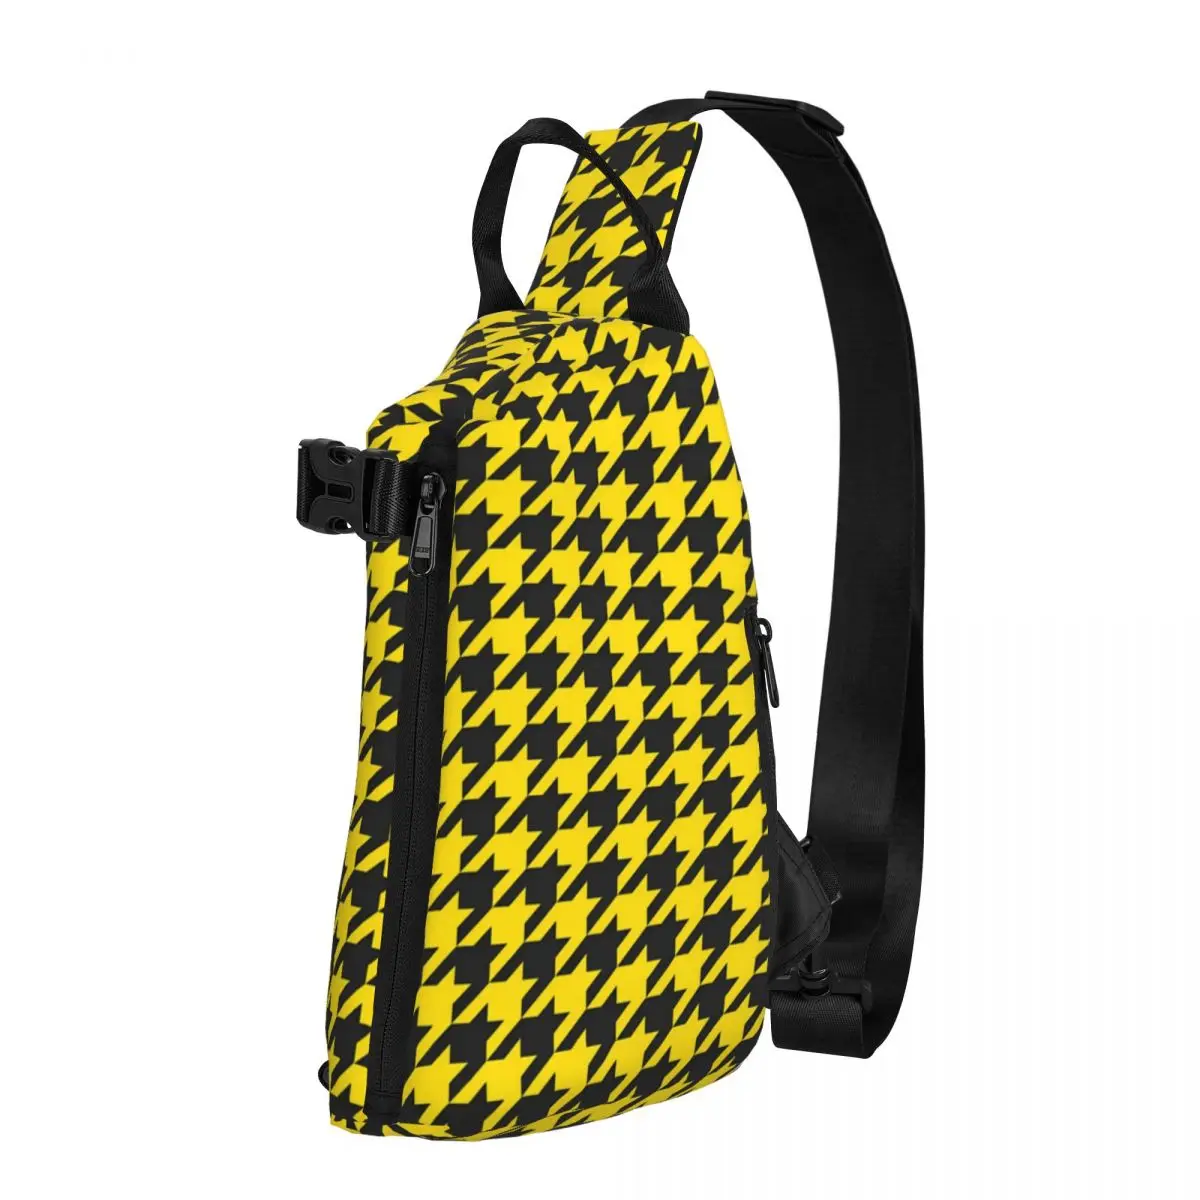 

Houndstooth Check Chest Bags Men Yellow Black Bicycle Shoulder Bag Leisure Graphic Crossbody Bag University Running Sling Bags